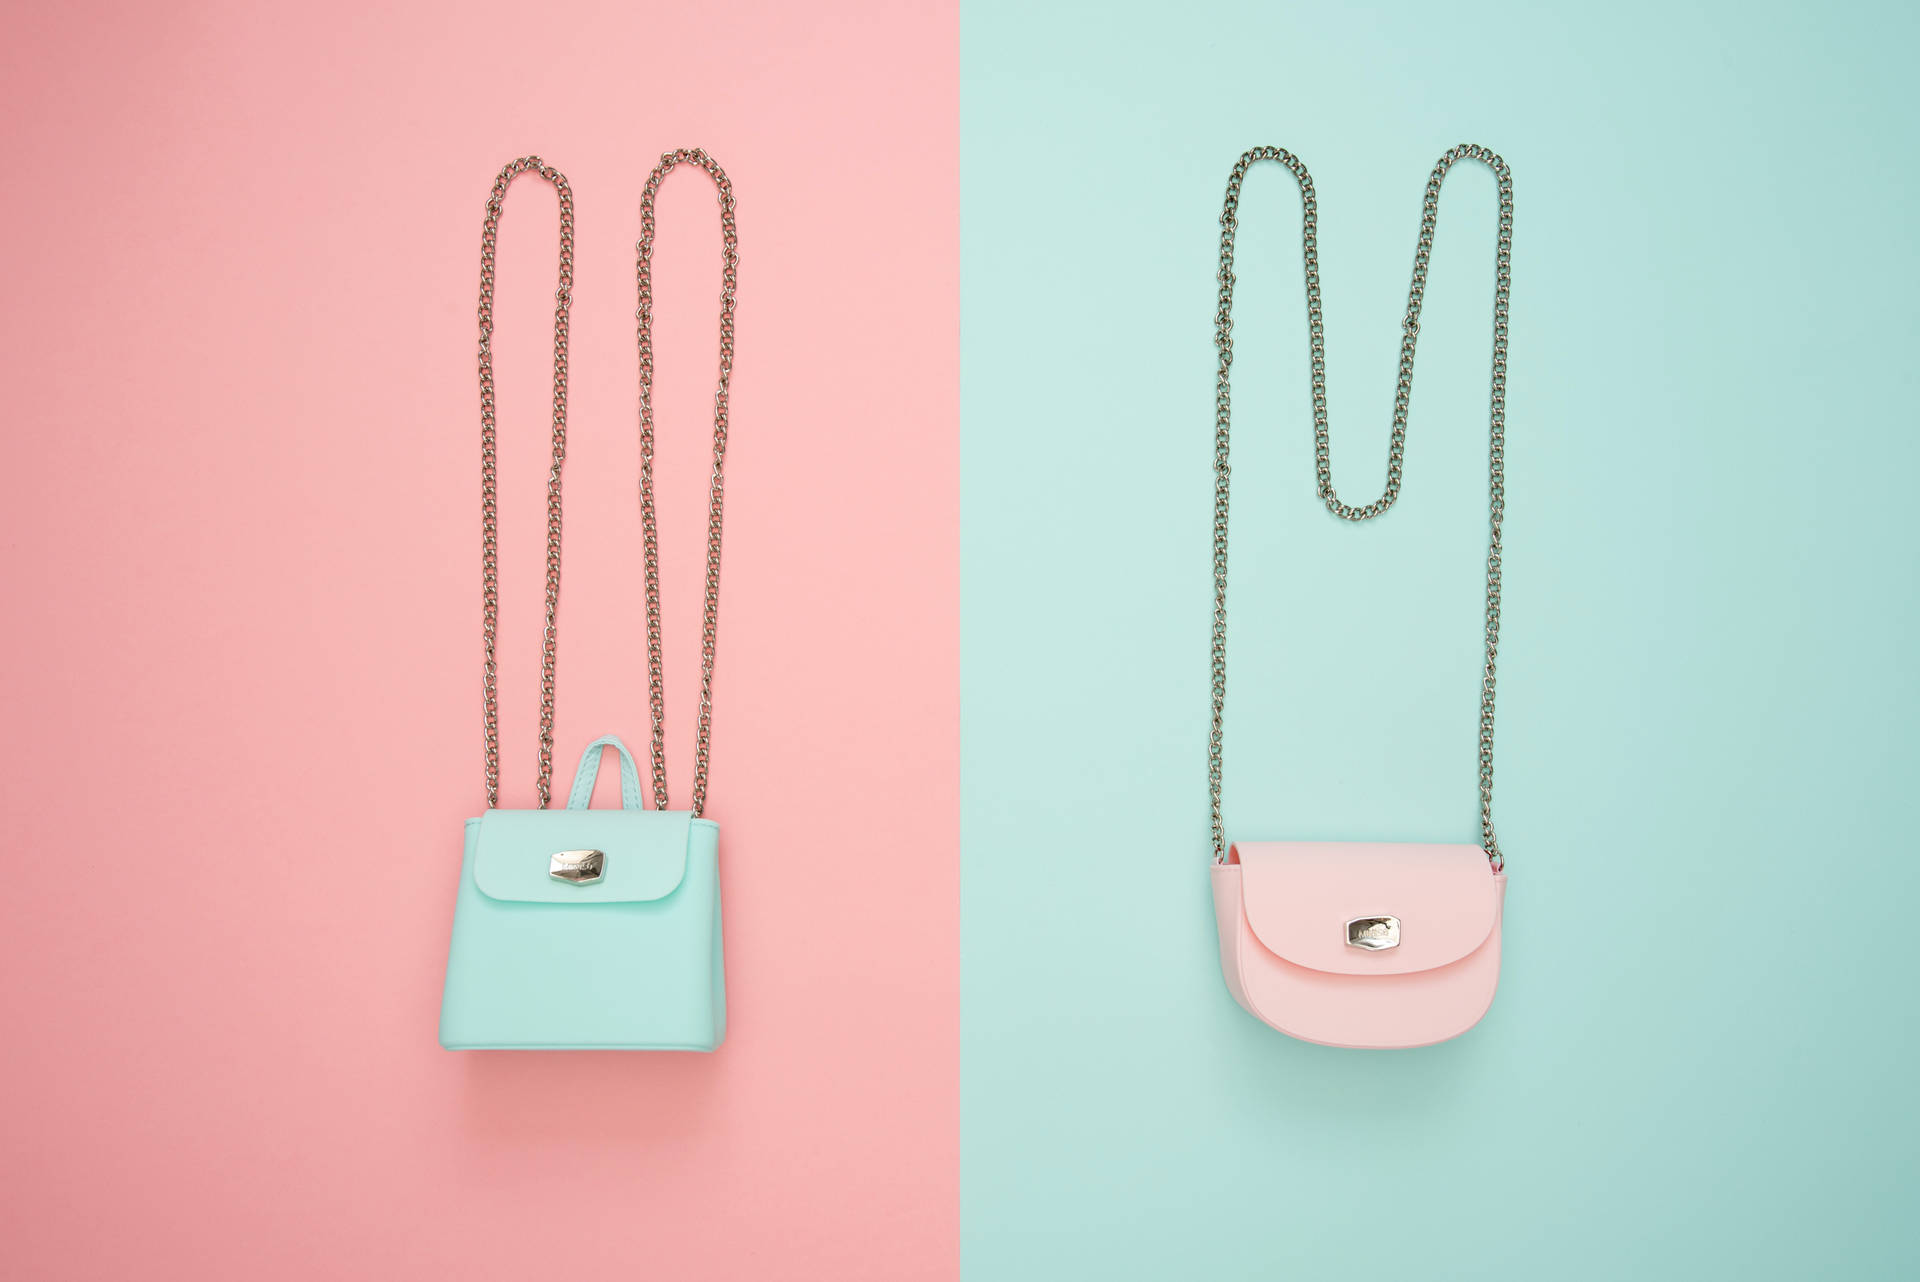 Cute Pastel Aesthetic Pink And Blue Bags Background